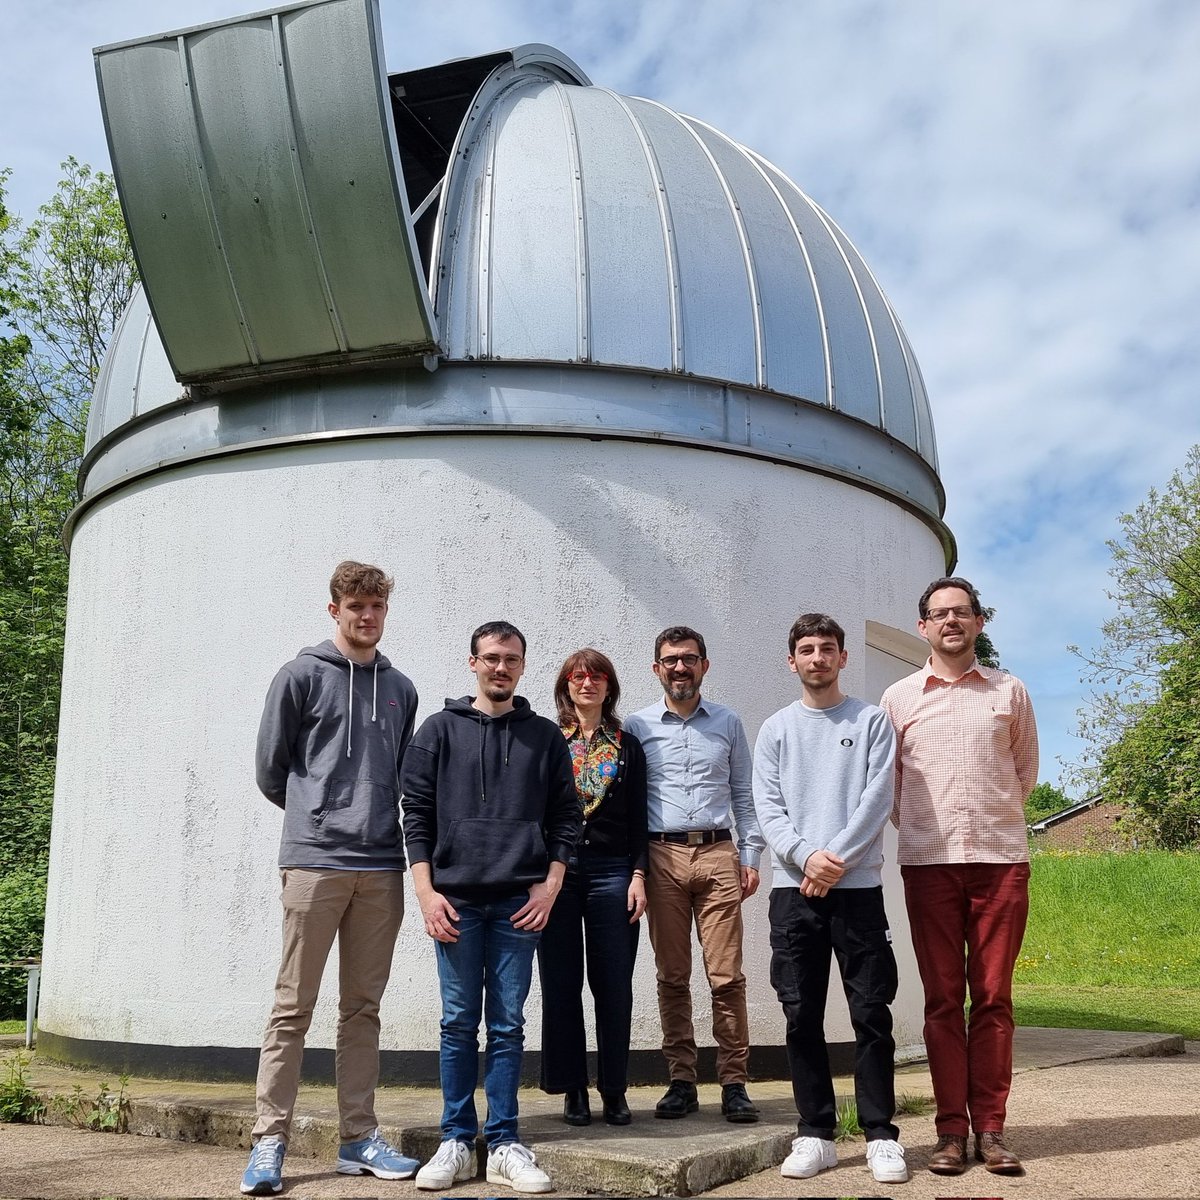 A big welcome to the tutors of our 3 French students visiting us today. Showcasing projects (spectroscopy, photometryand super moons), progress and link with NTU (summer) students as well as school placement students. @NottmTrentUni @NTUSciTech @NottinghamAstro @sherwoodobs